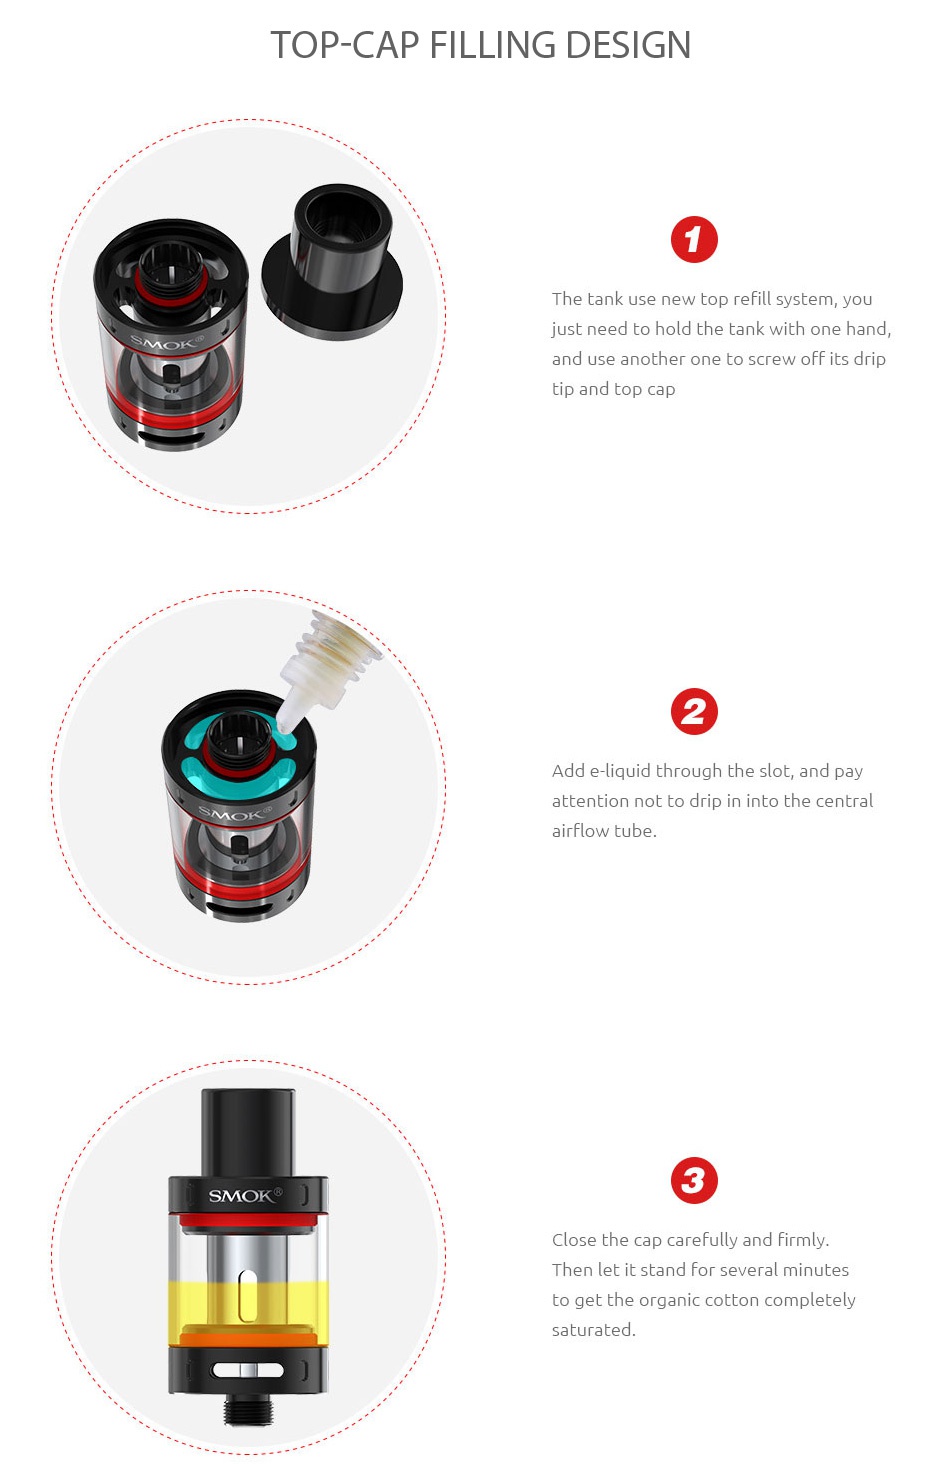 SMOK Vape Pen Tank 2ml TOP CAP FILLING DESIGN The tank use new top refill system  you ed to hold the tank with one hand MOK and use another one to screw off its d attention not to drip in into the central MOK SMOK  Close the cap care fully and firmly Then let it stand for several minutes to get the organic co letely saturated